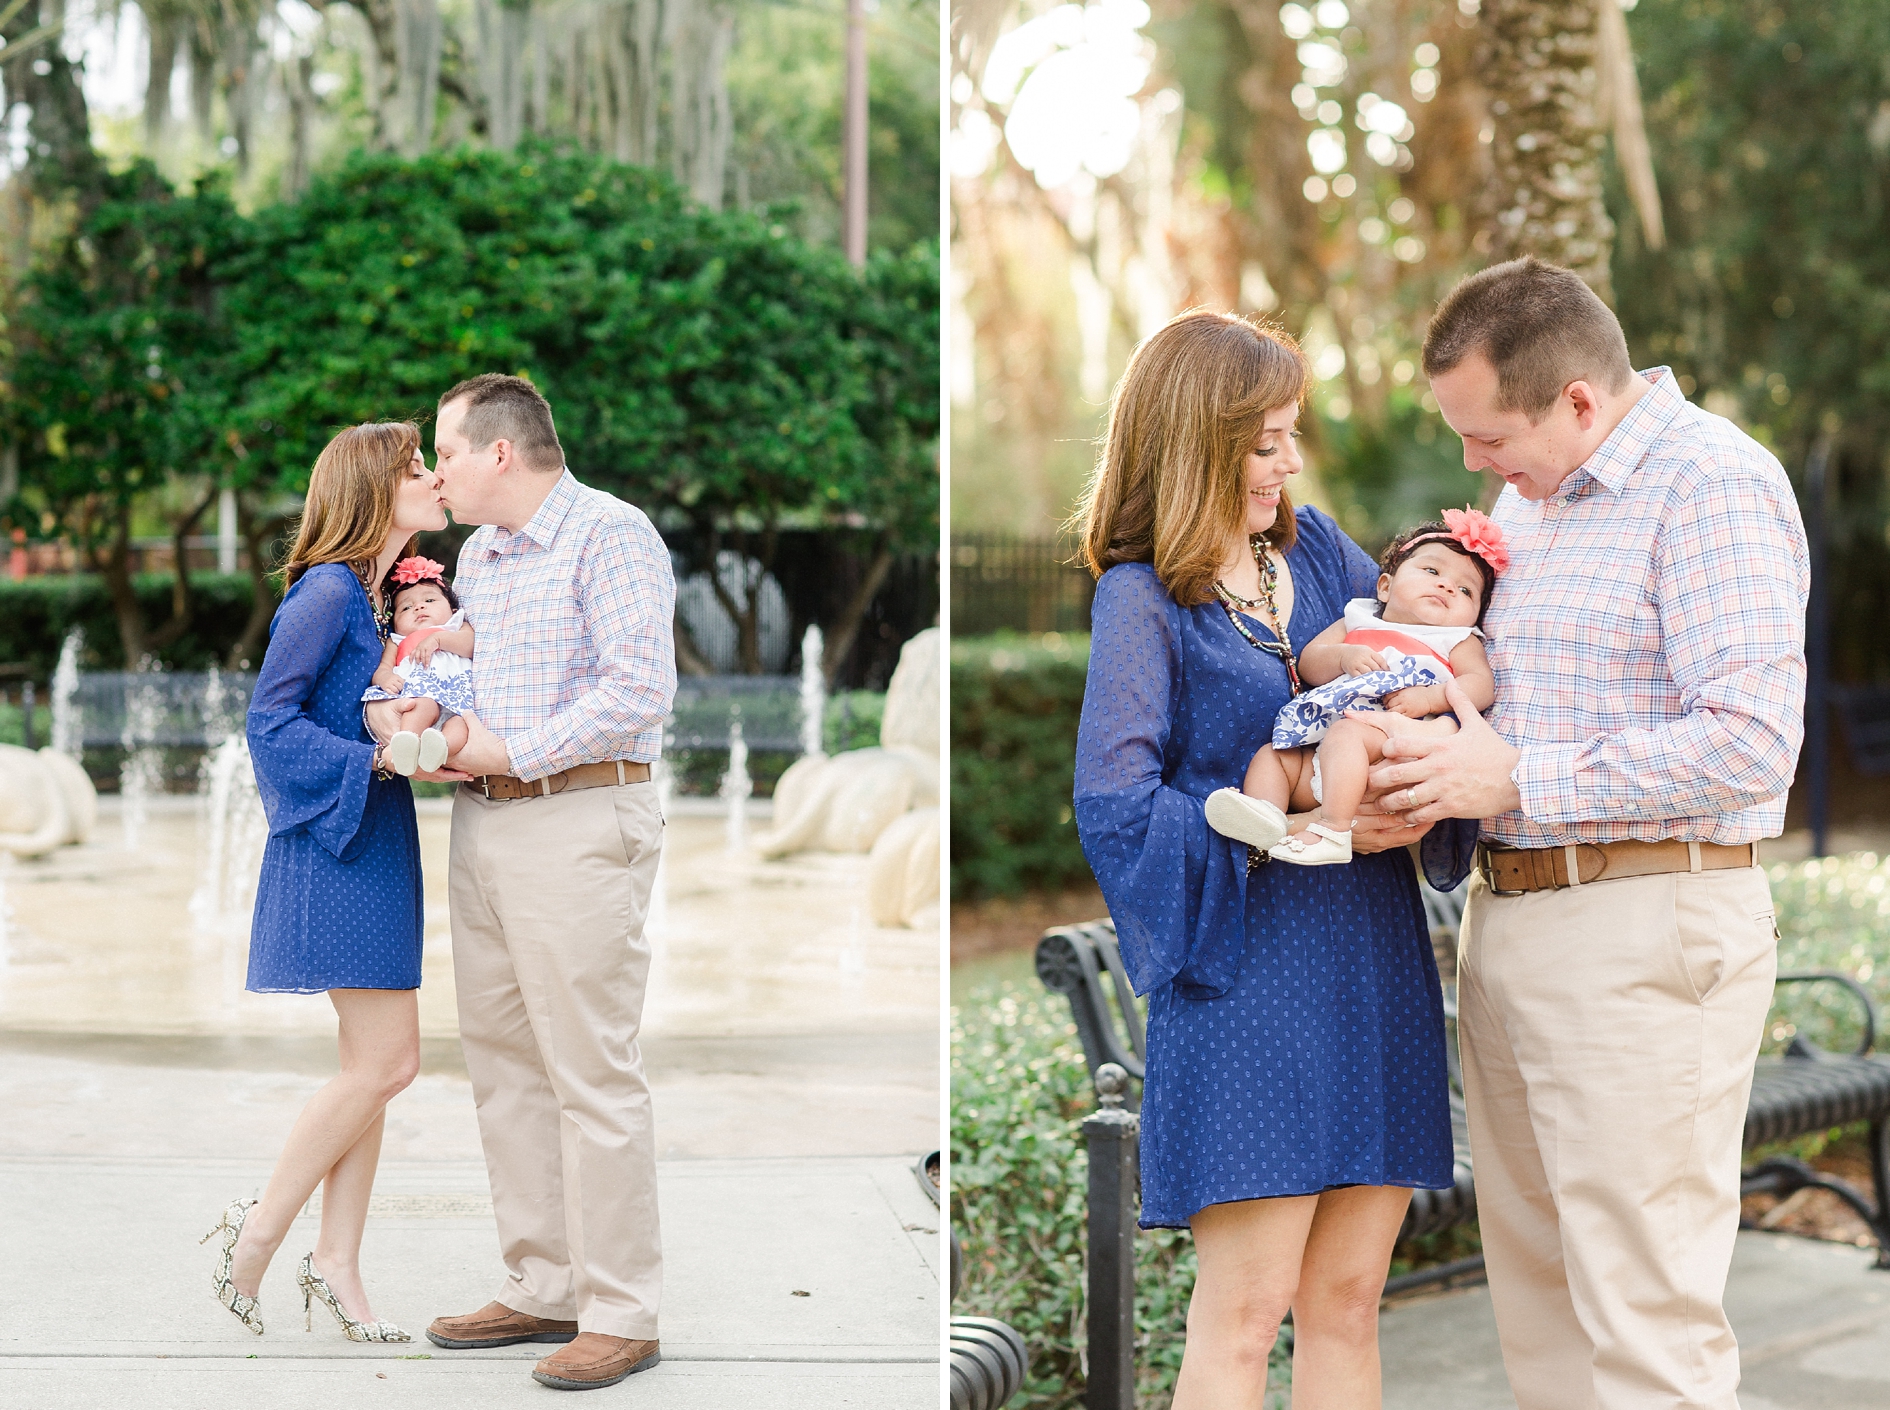 Tampa Photographer | © Ailyn La Torre Photography 2016